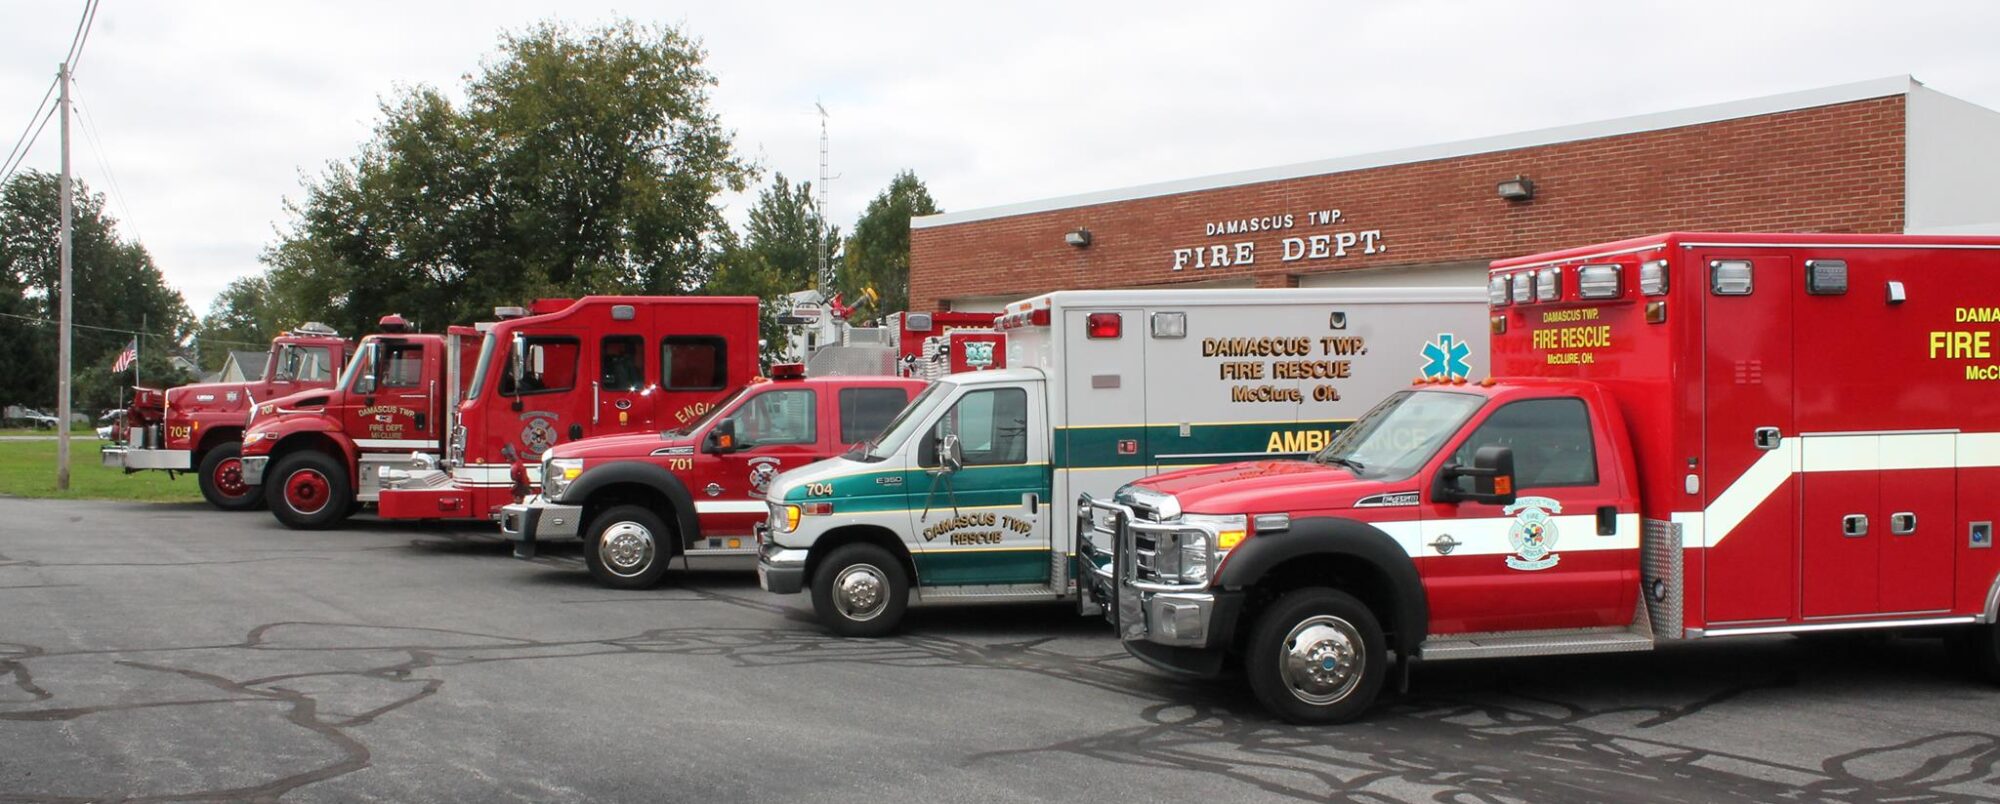 Damascus Township Fire & Rescue